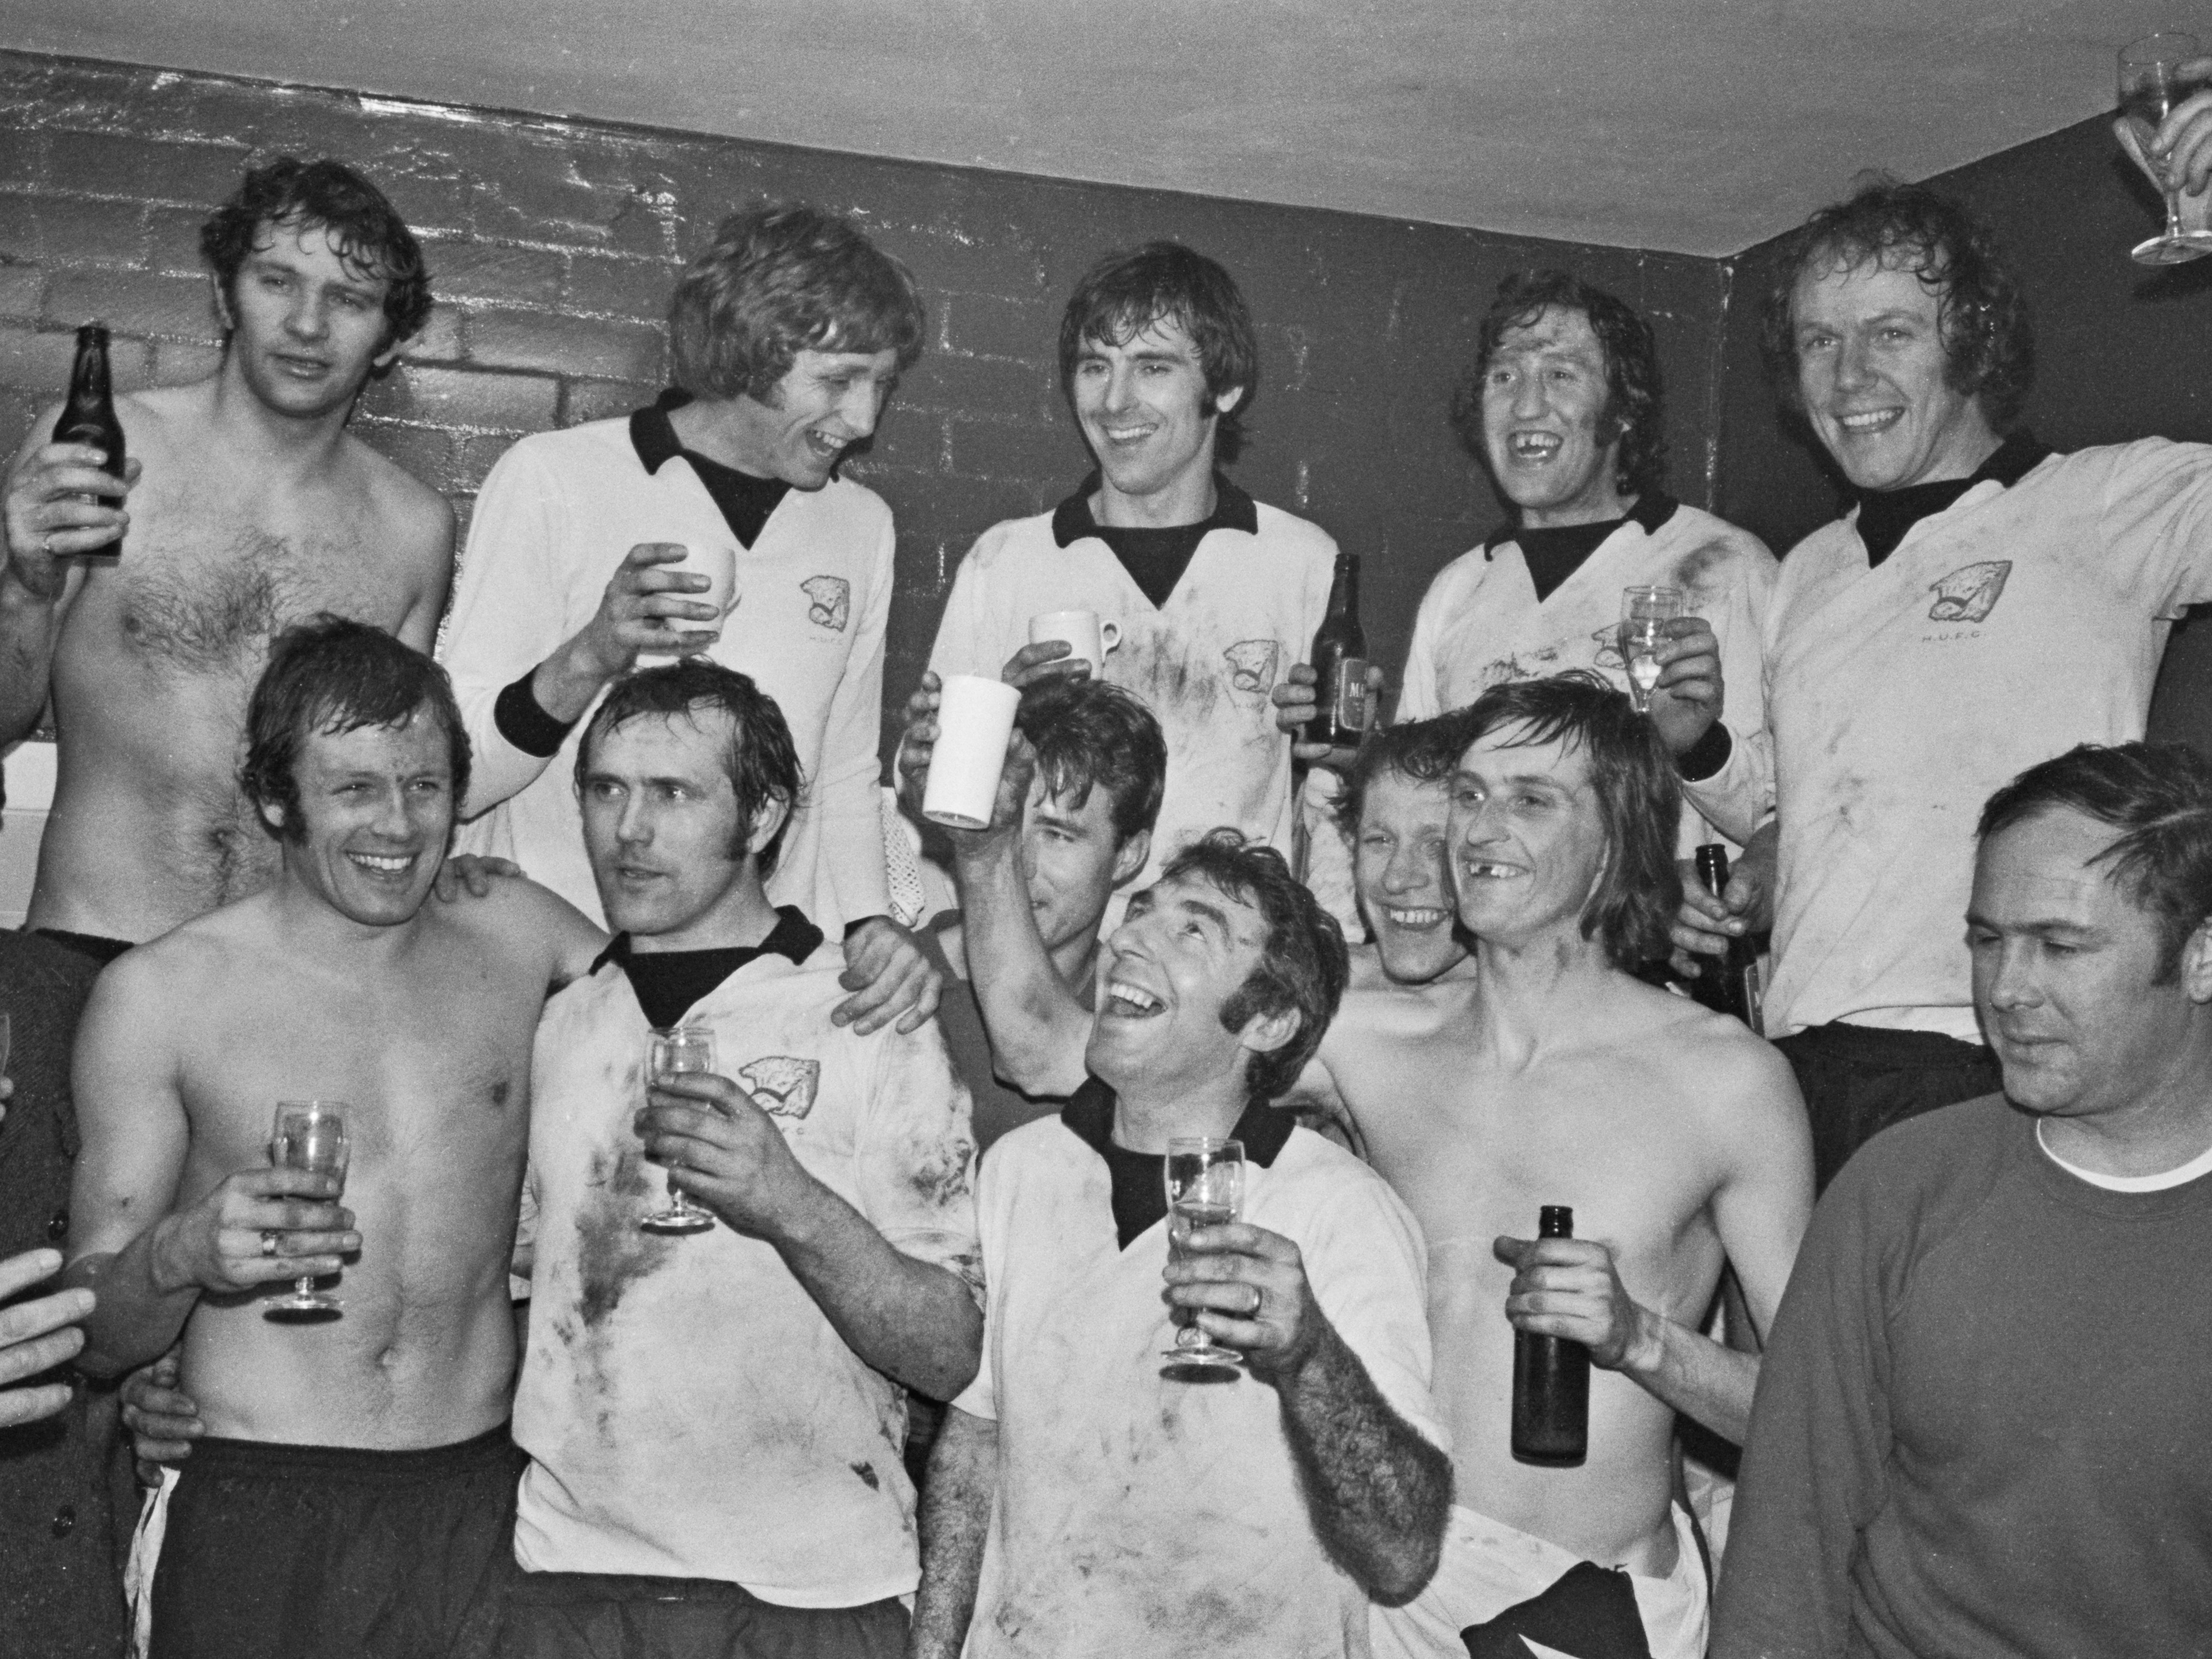 Hereford celebrate their stunning upset against Newcastle in 1972